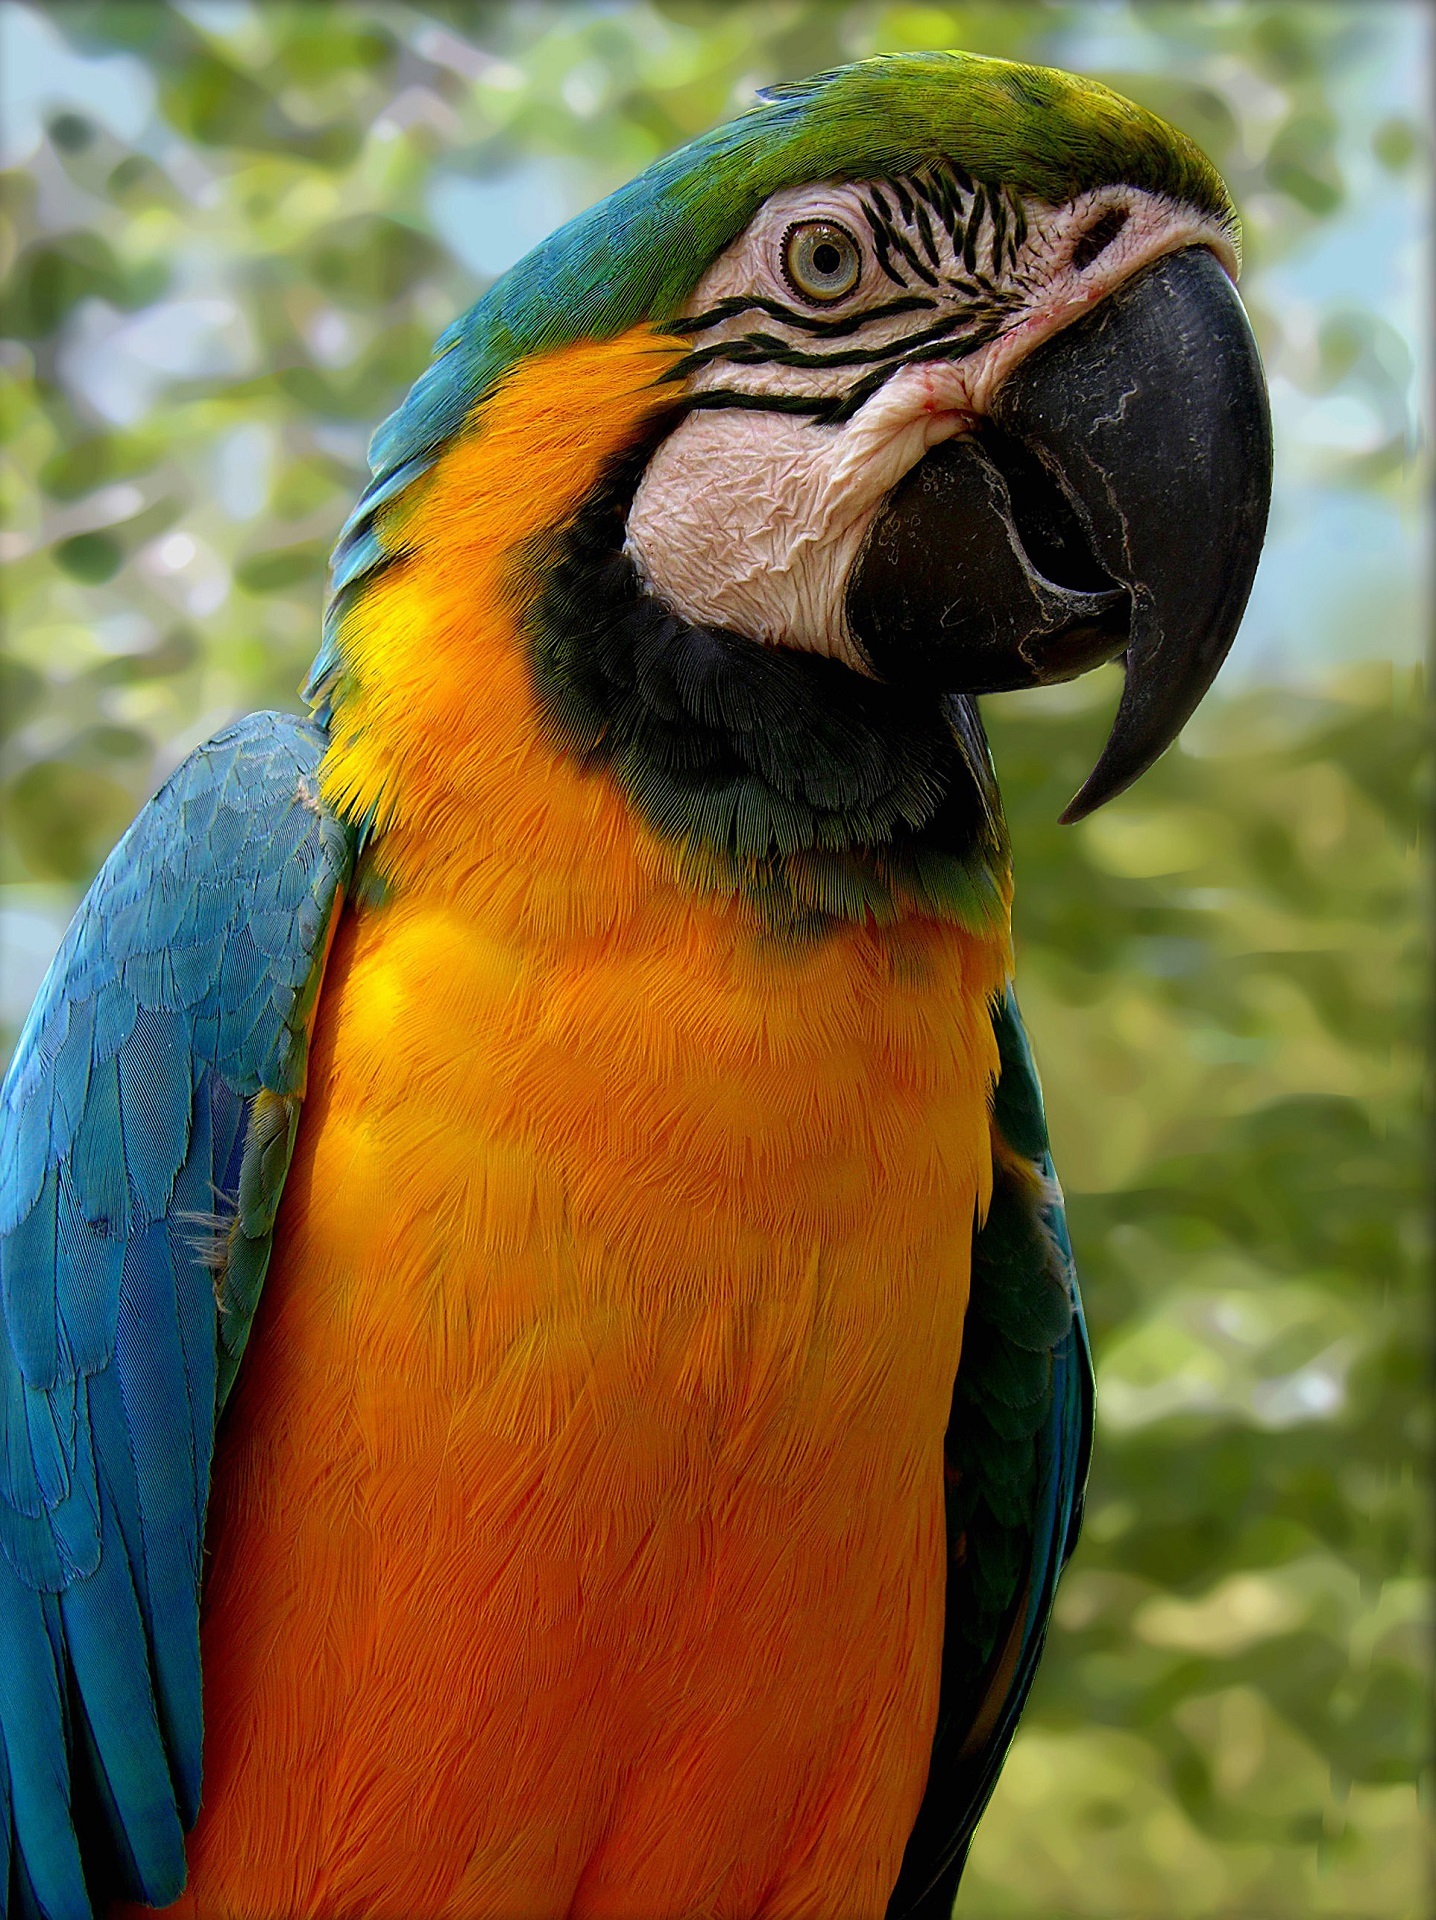 Parrot in the park photo